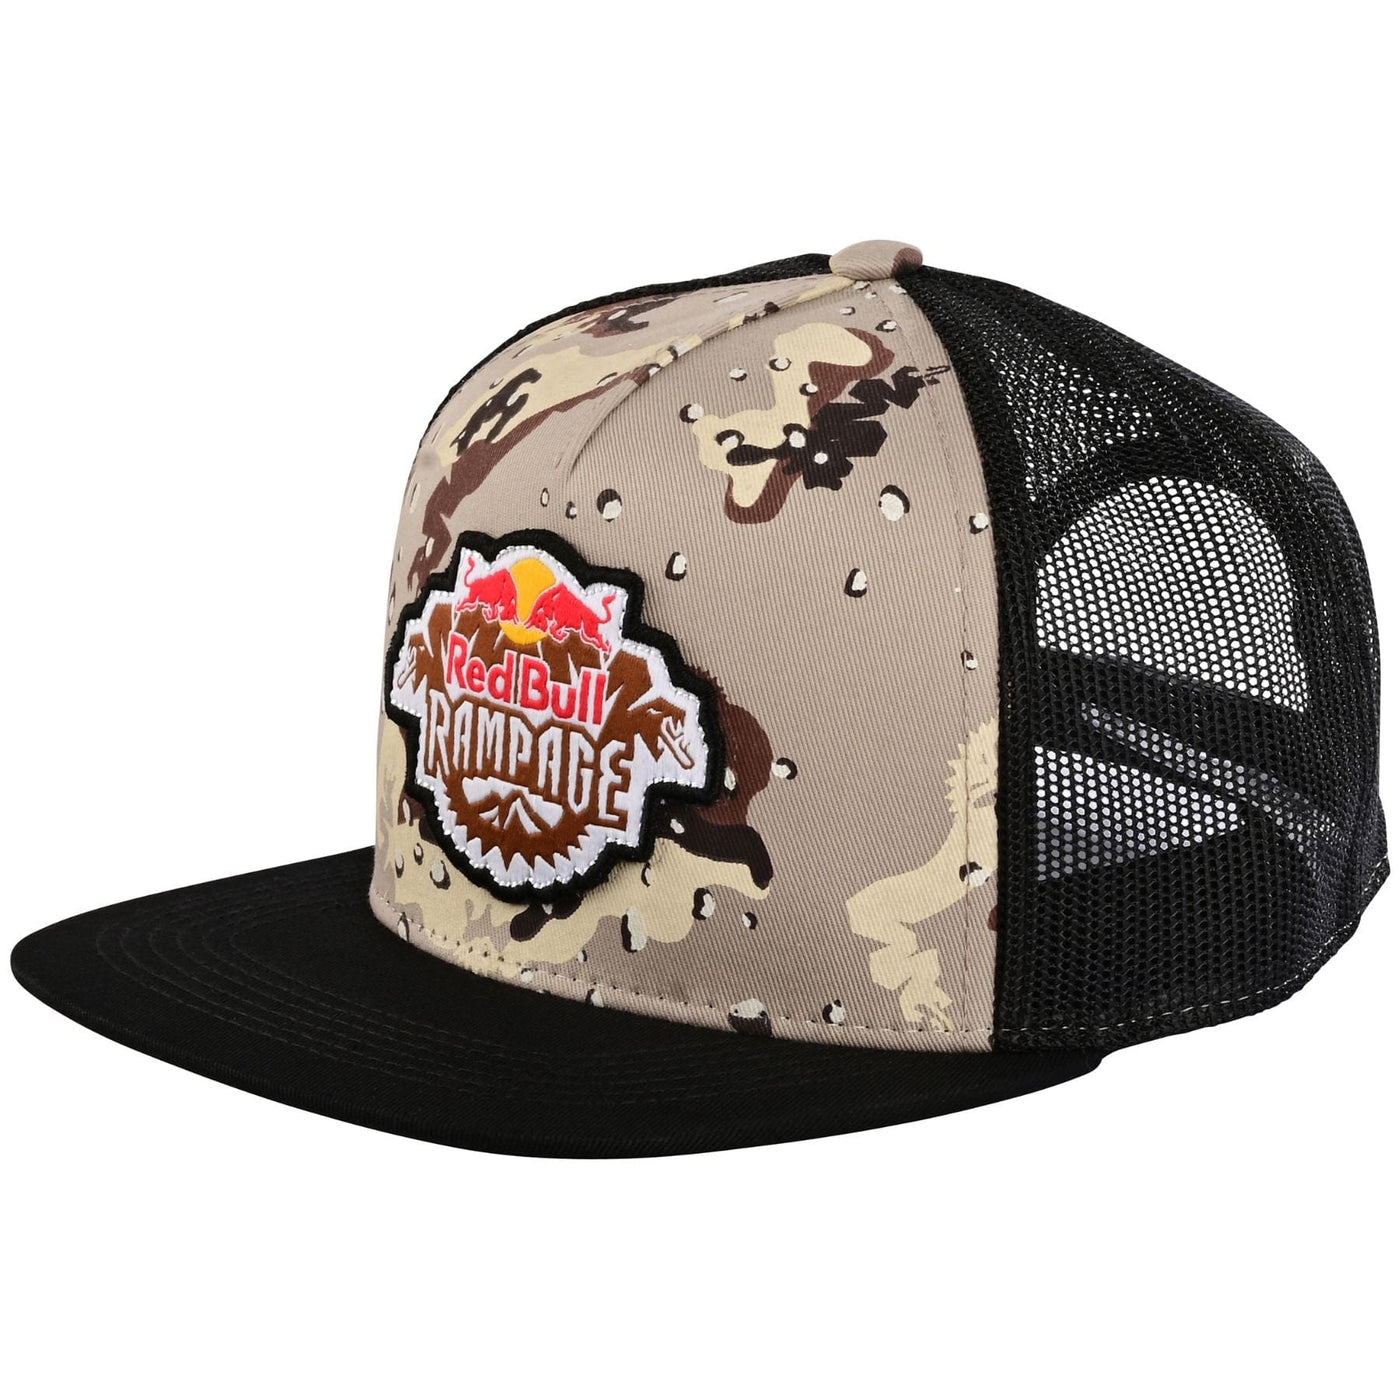 Cepure Troy Lee Designs Red Bull Rampage Logo - Camo